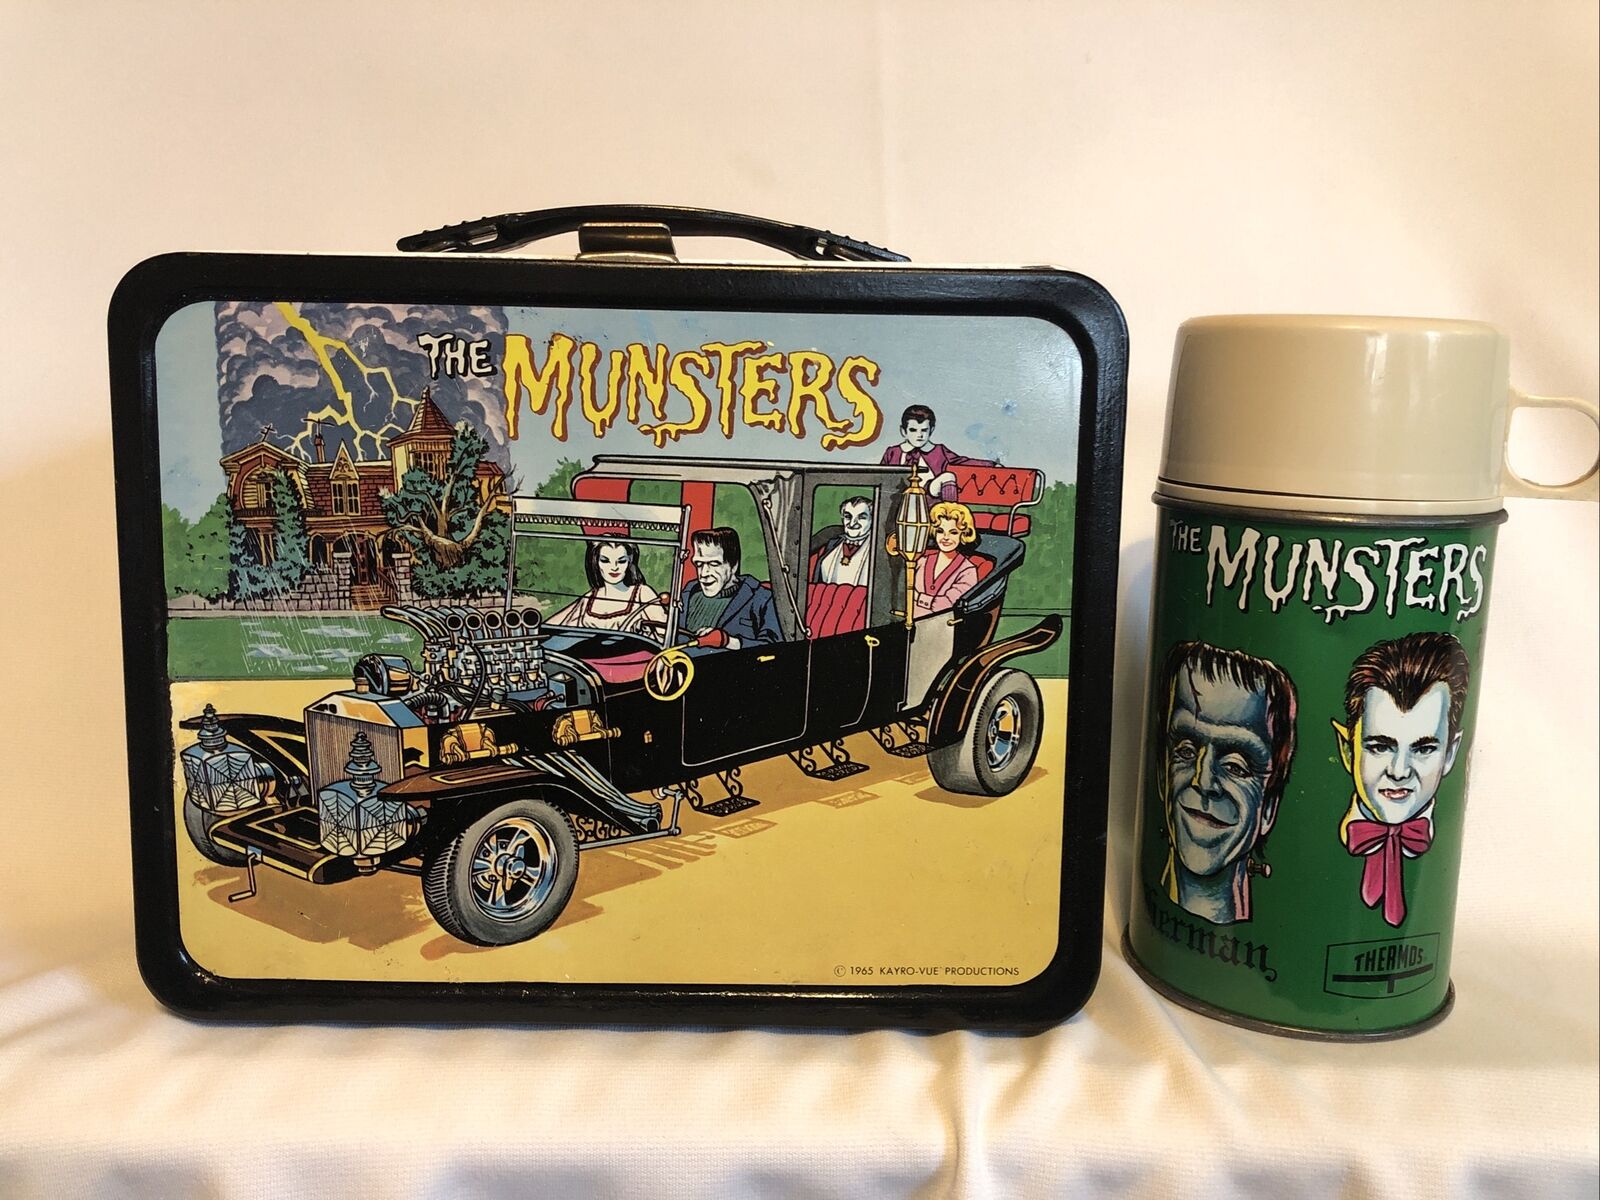 Vintage THE MUNSTERS Metal Lunchbox 1965 KAYRO  Lunch Box and Thermos